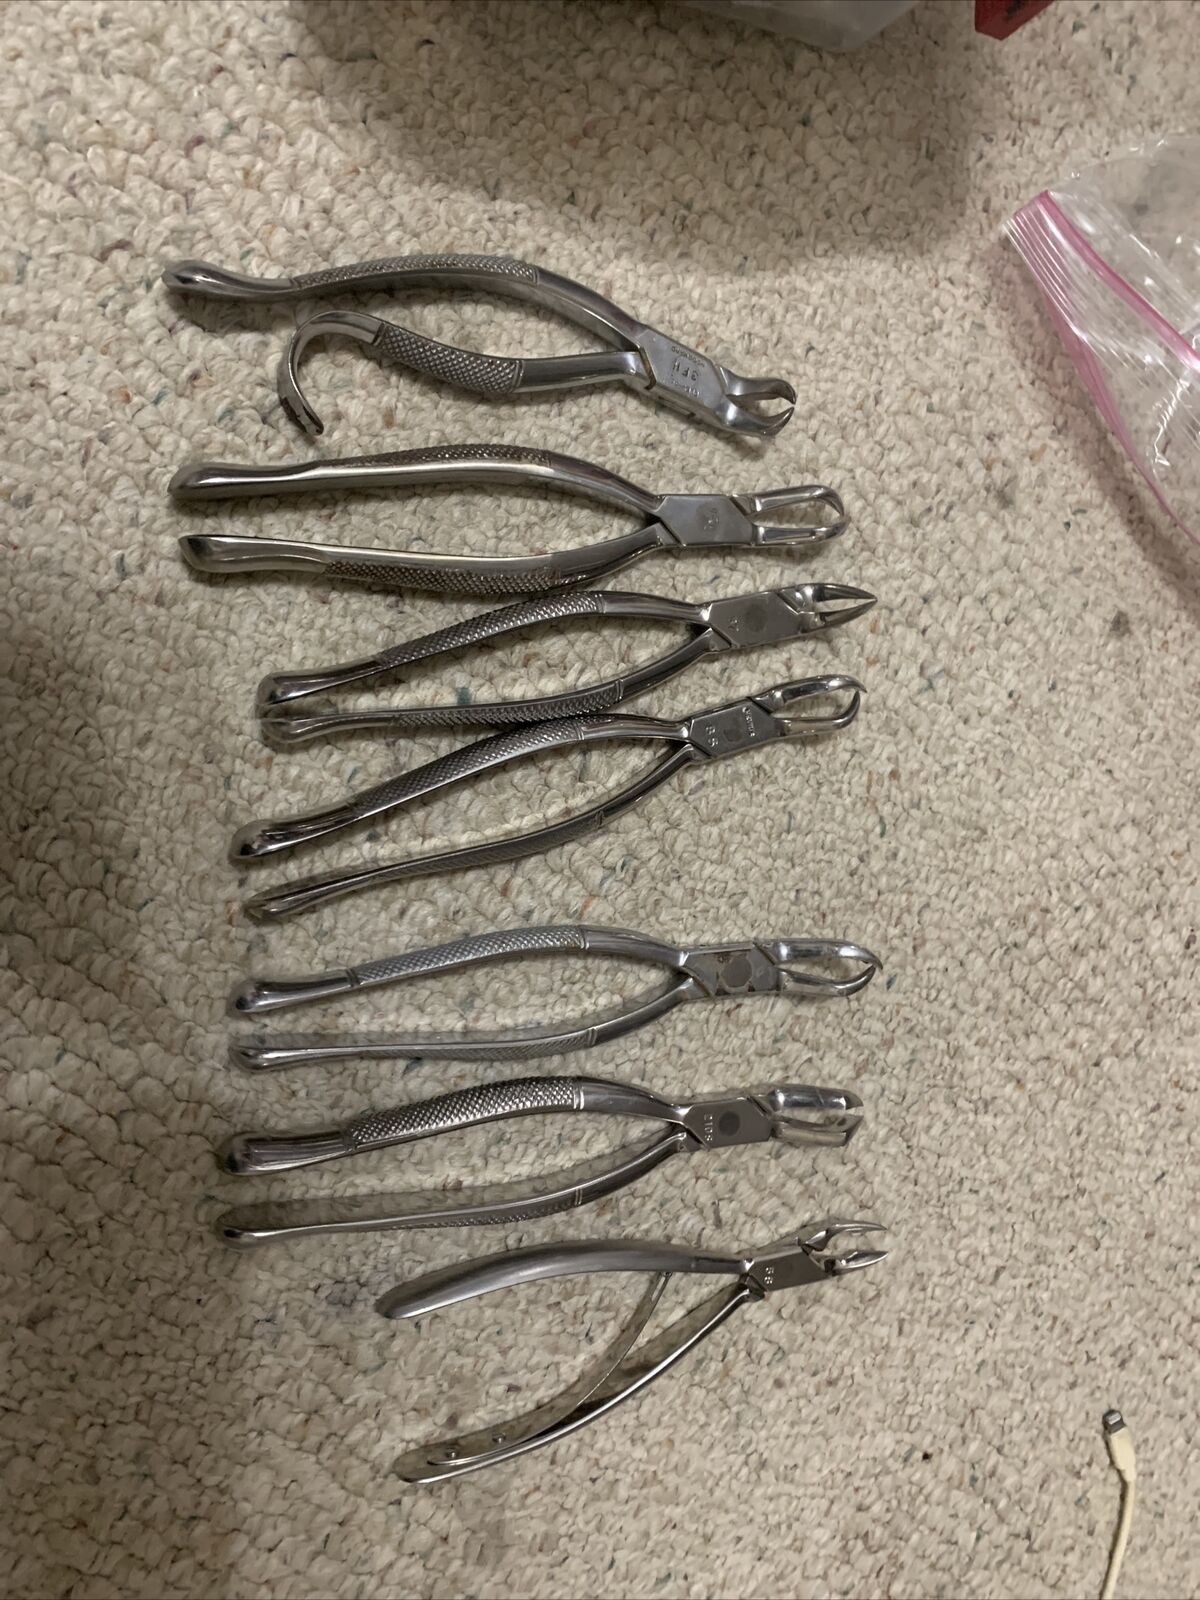 7 Vintage Dental Tooth Extractors/ Pliers, Germany USA Clev Dent Stainless